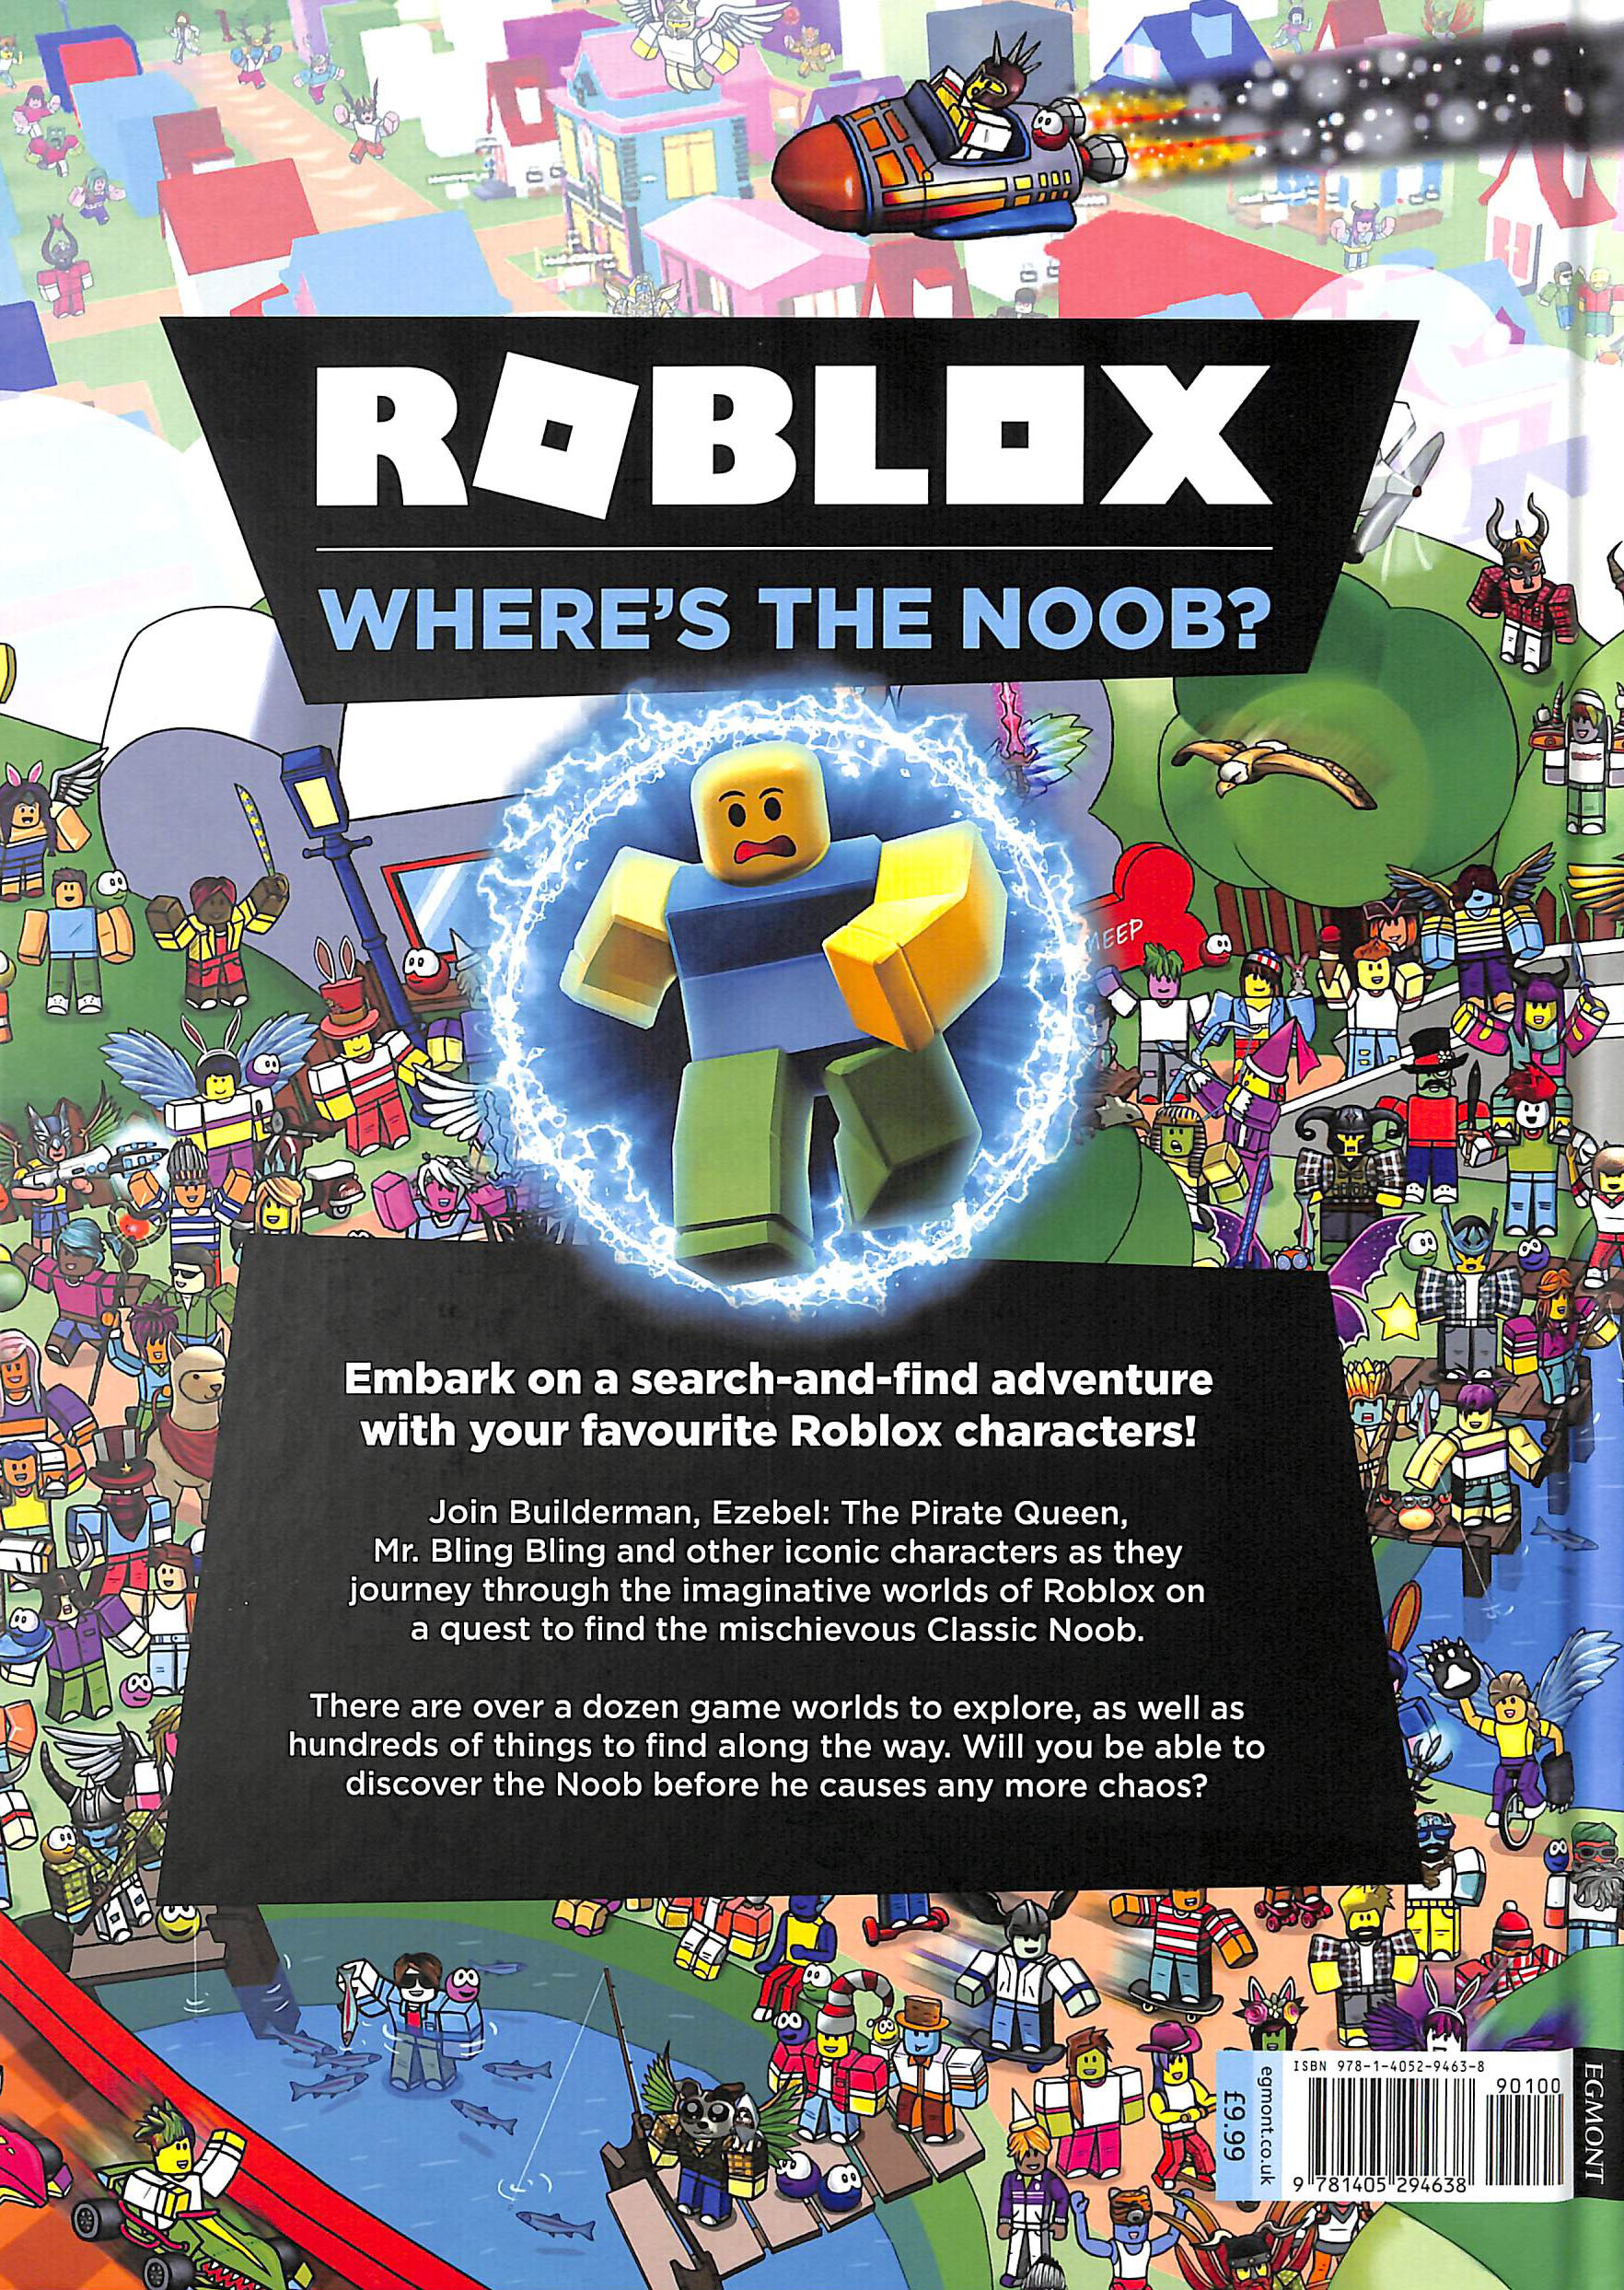 Roblox Wheres The Noob By Uk Egmont Publishing - roblox ultimate guide collection egmont publishing uk book